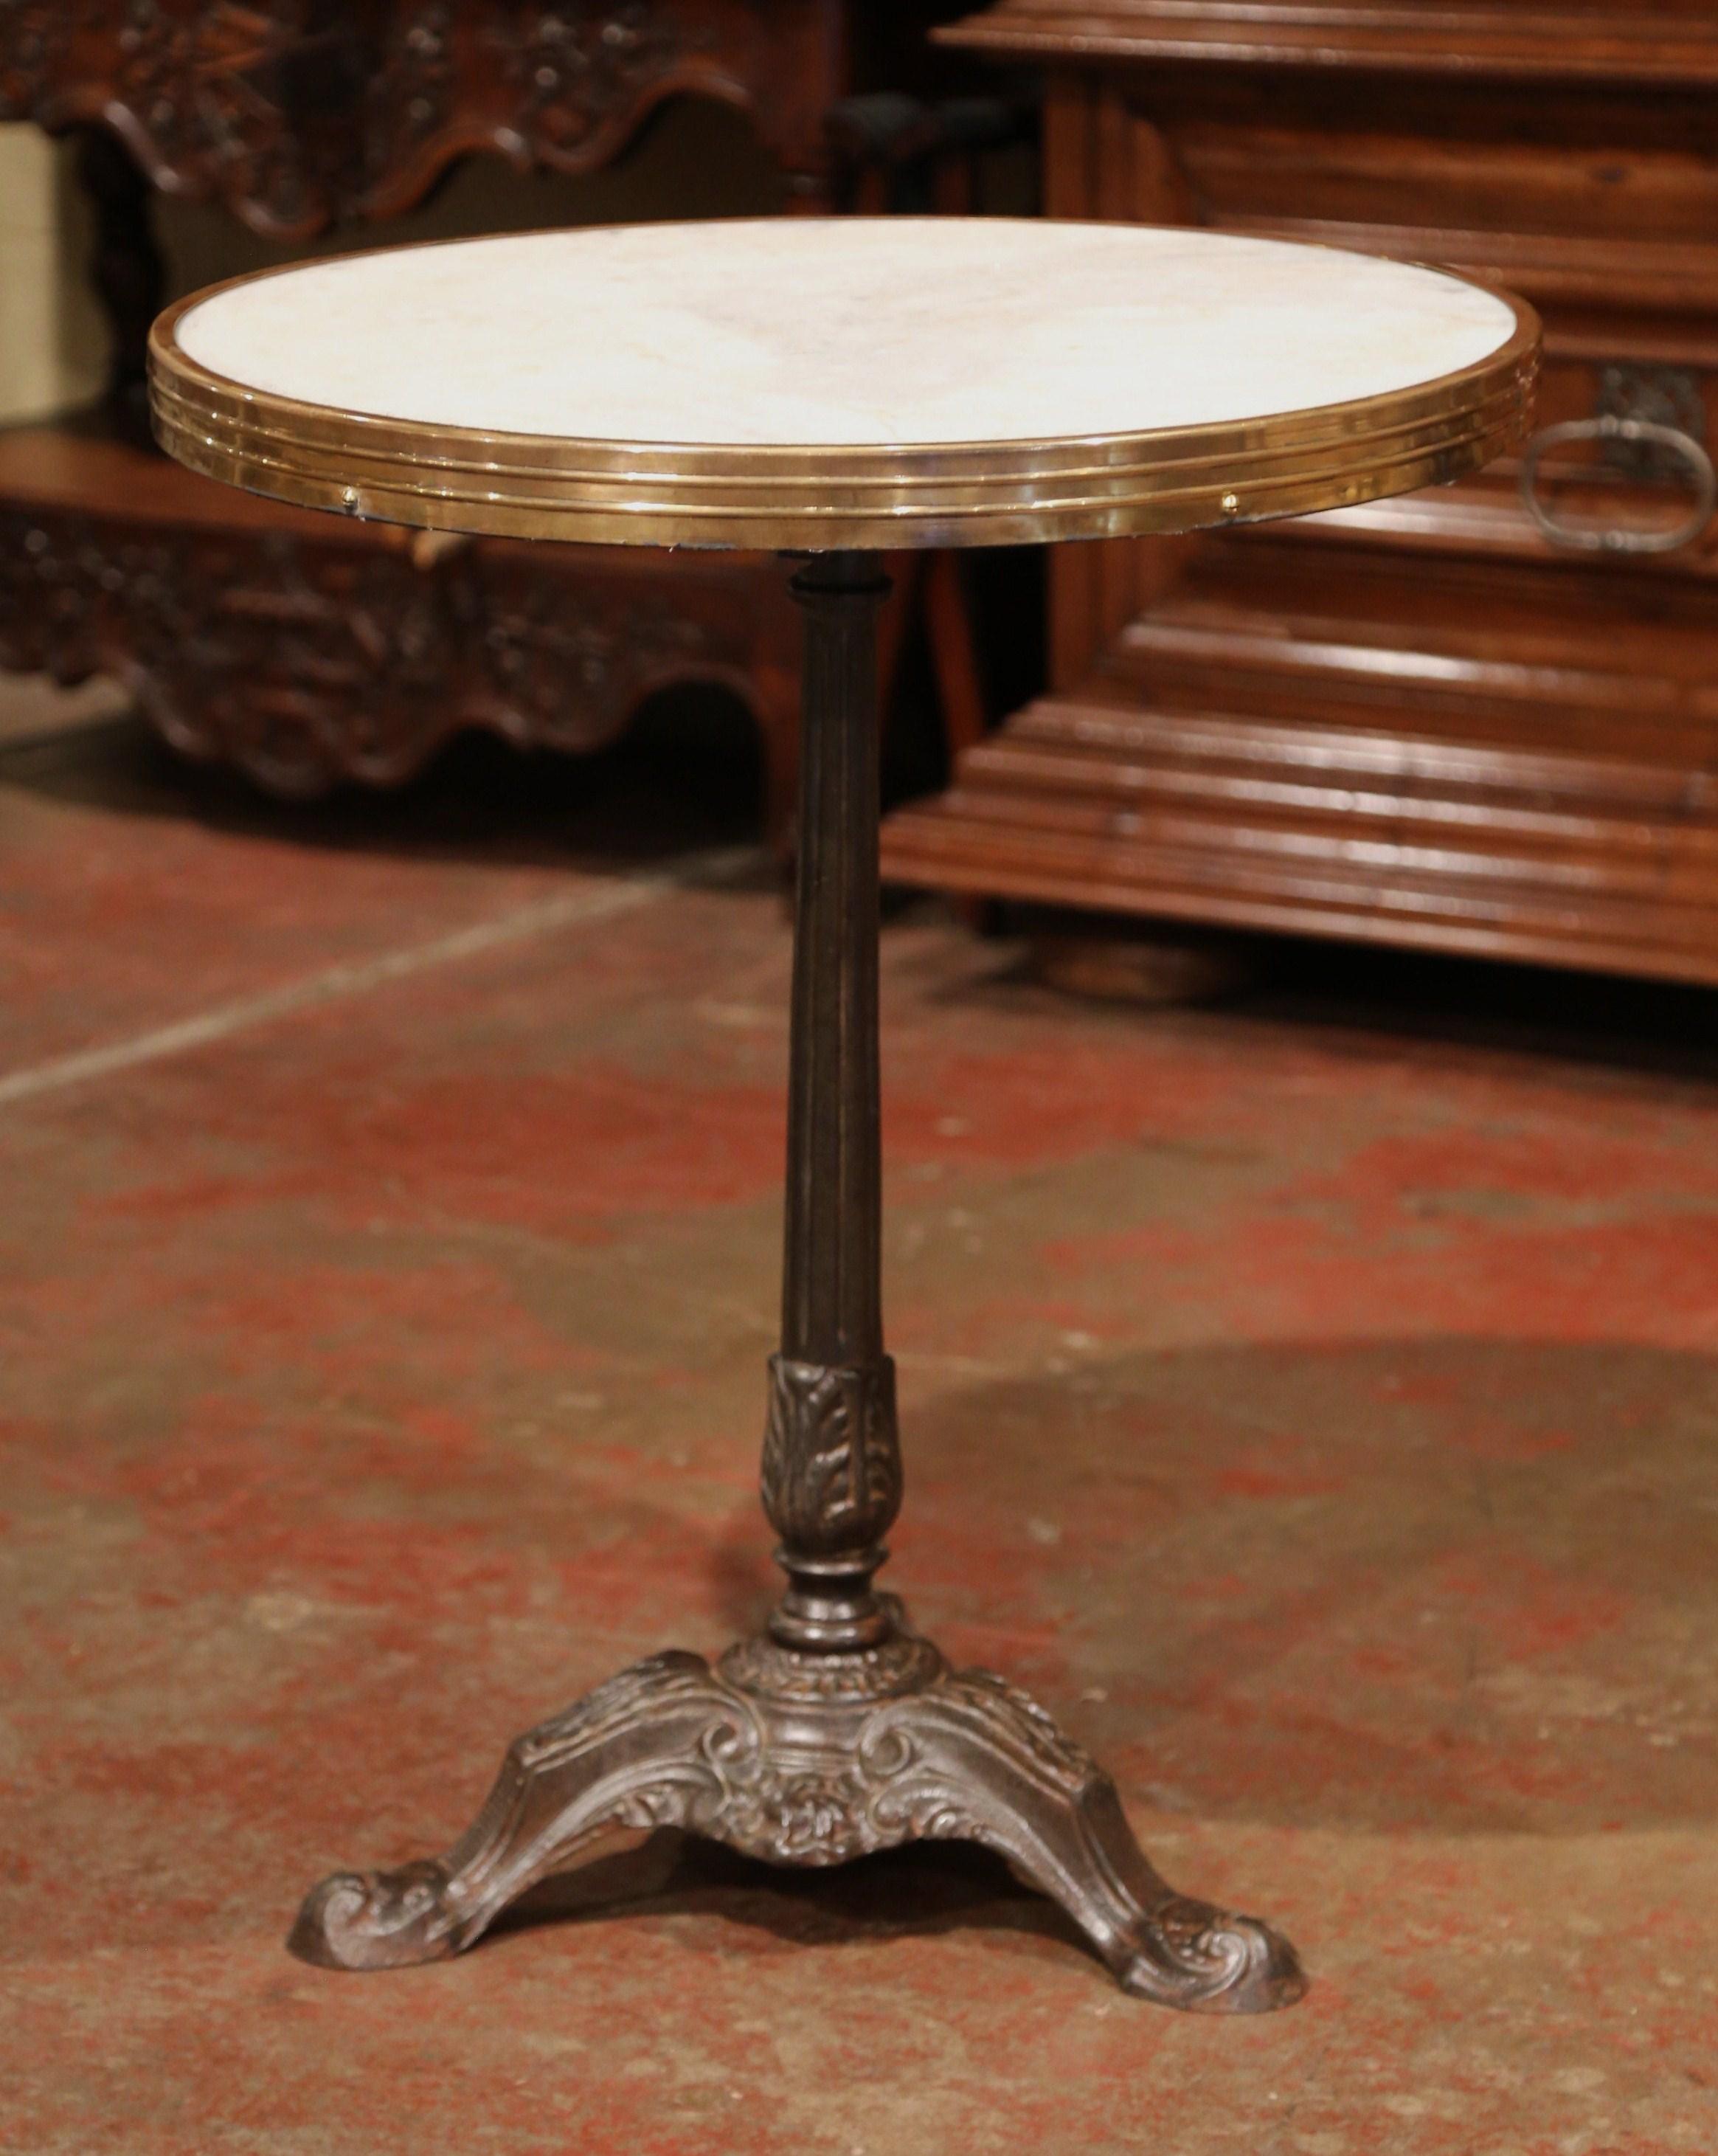 This exquisite, antique gueridon was crafted in Paris, France, circa 1870. The Classic bistrot table features its original, round grey and white marble top embellished by a circular brass trim. The intricate base sits on three feet decorated with